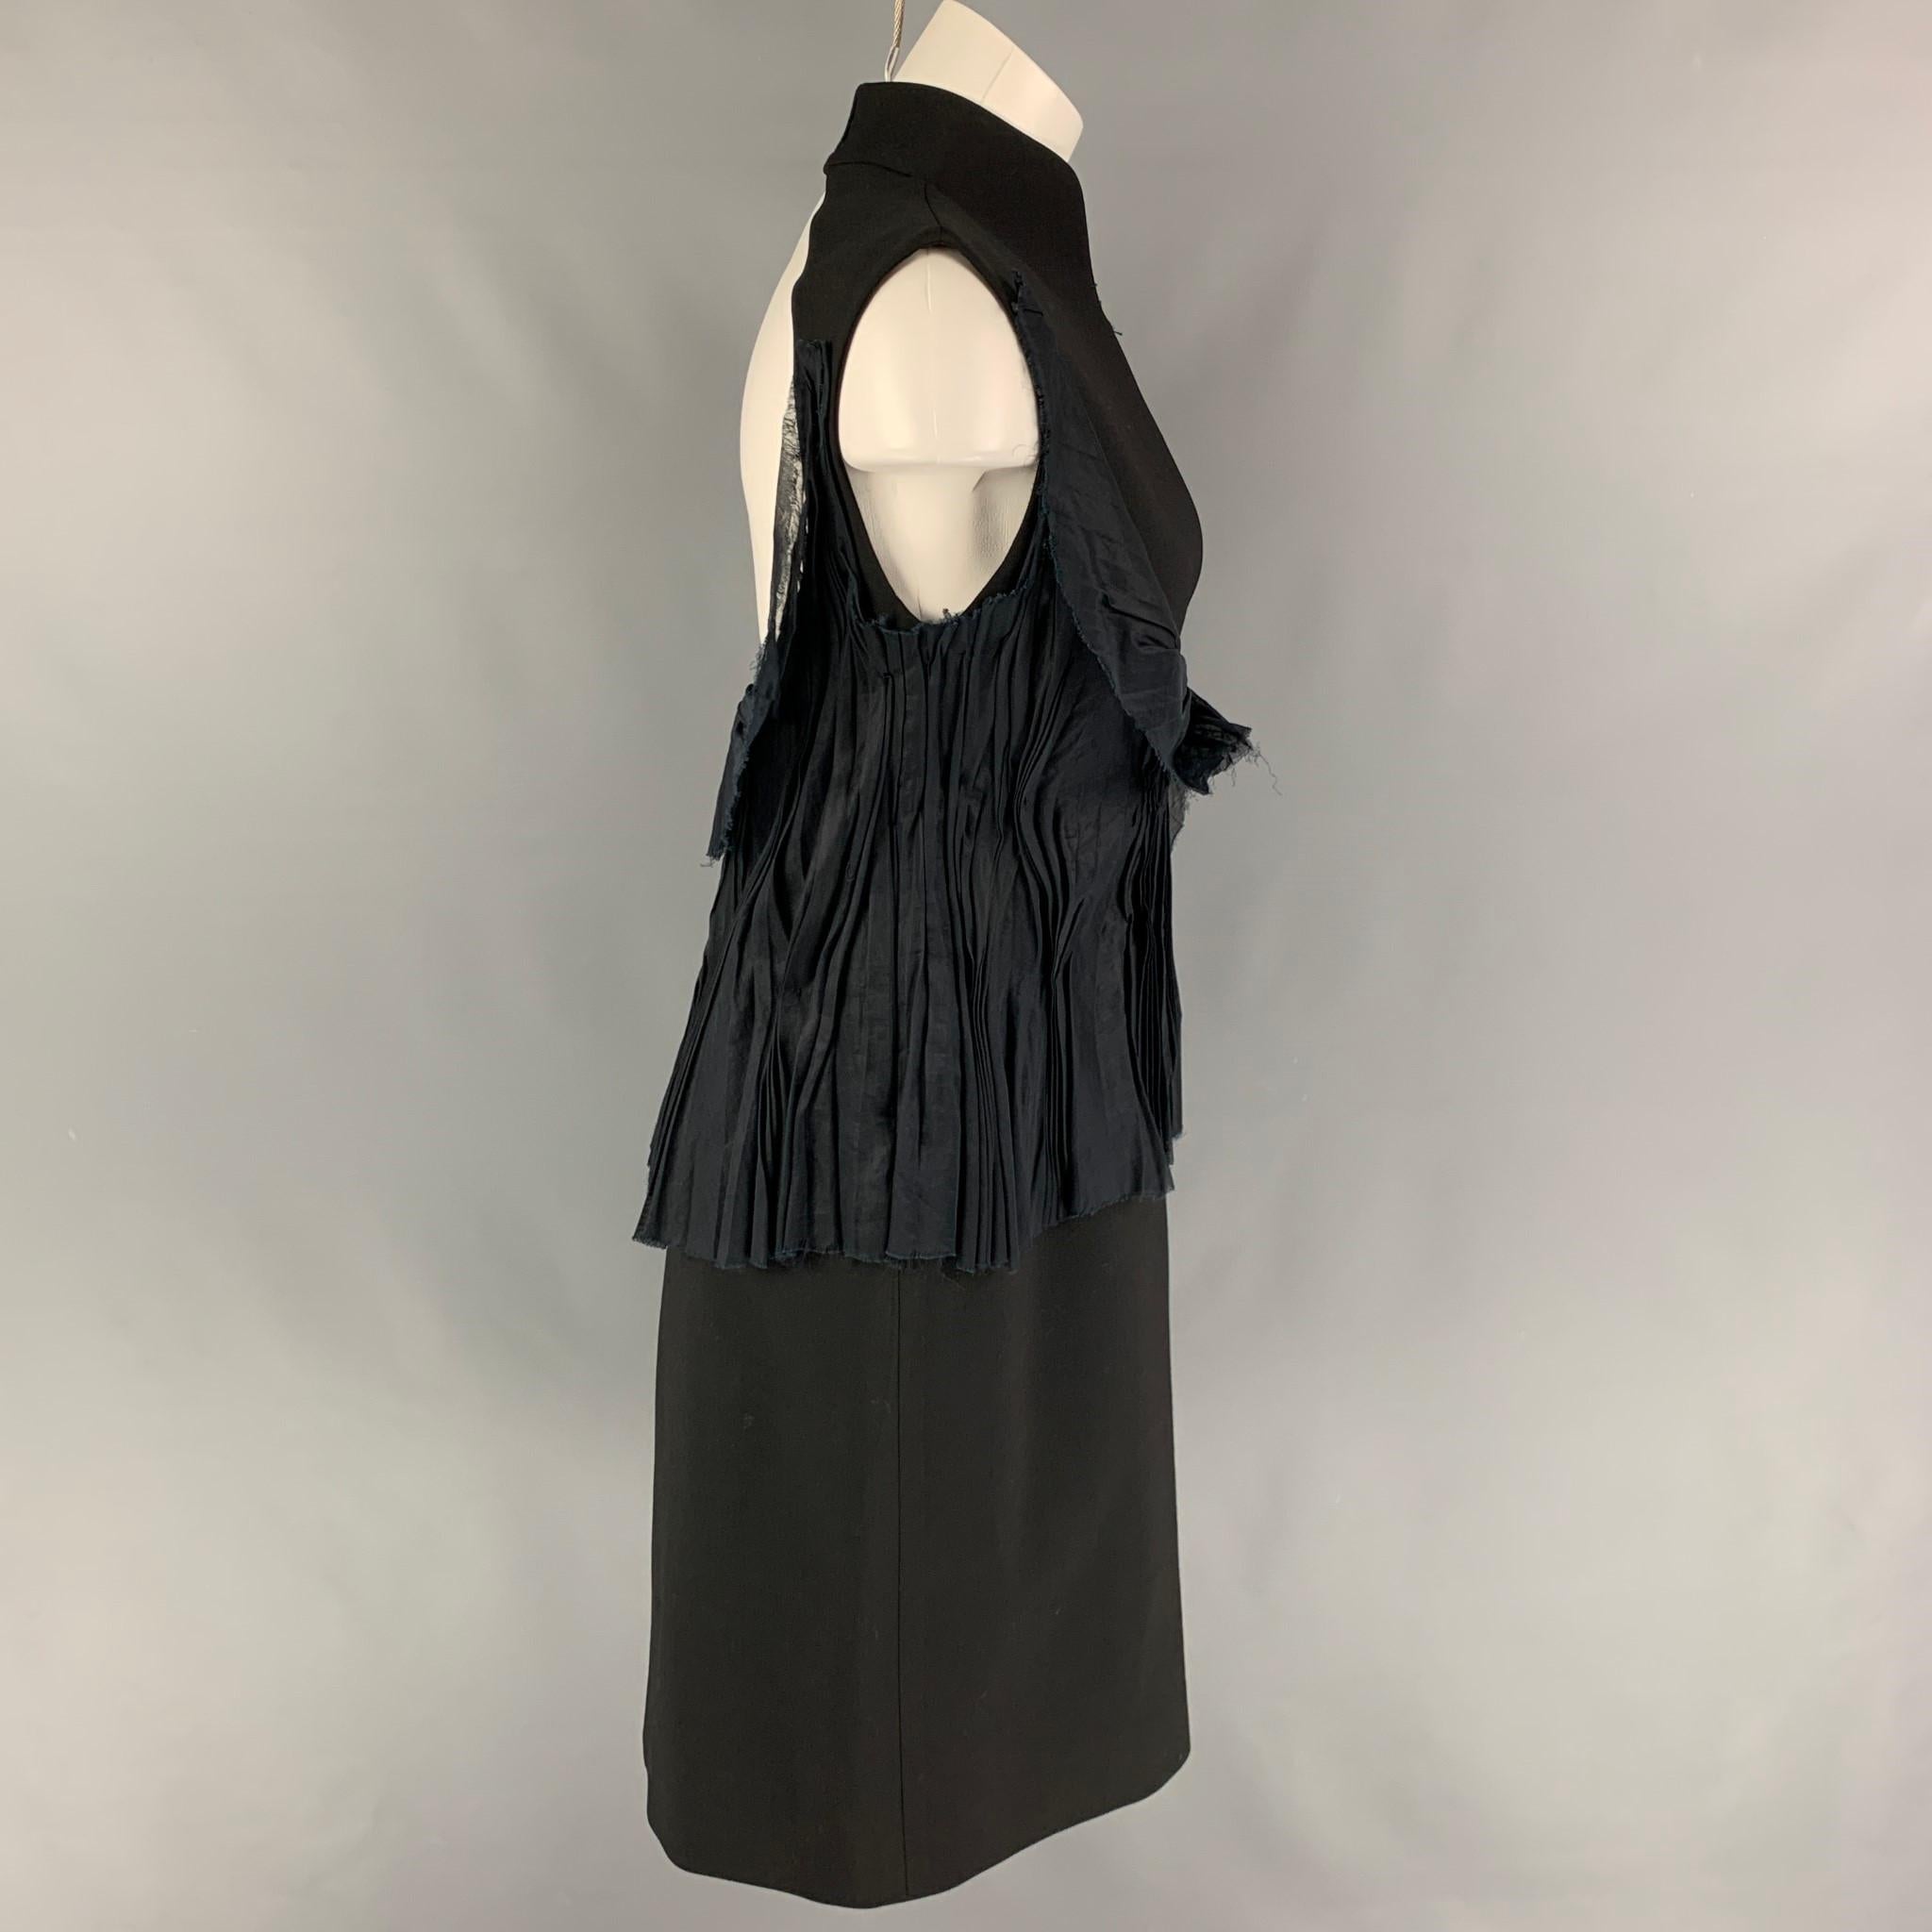 BRIONI dress comes in a black mercerized cotton featuring a high collar, ruffled panel design, sleeveless, open back, side zipper, and a hook & loop closure.

Very Good Pre-Owned Condition. Fabric tag removed.
Marked: Size tag removed.
Original